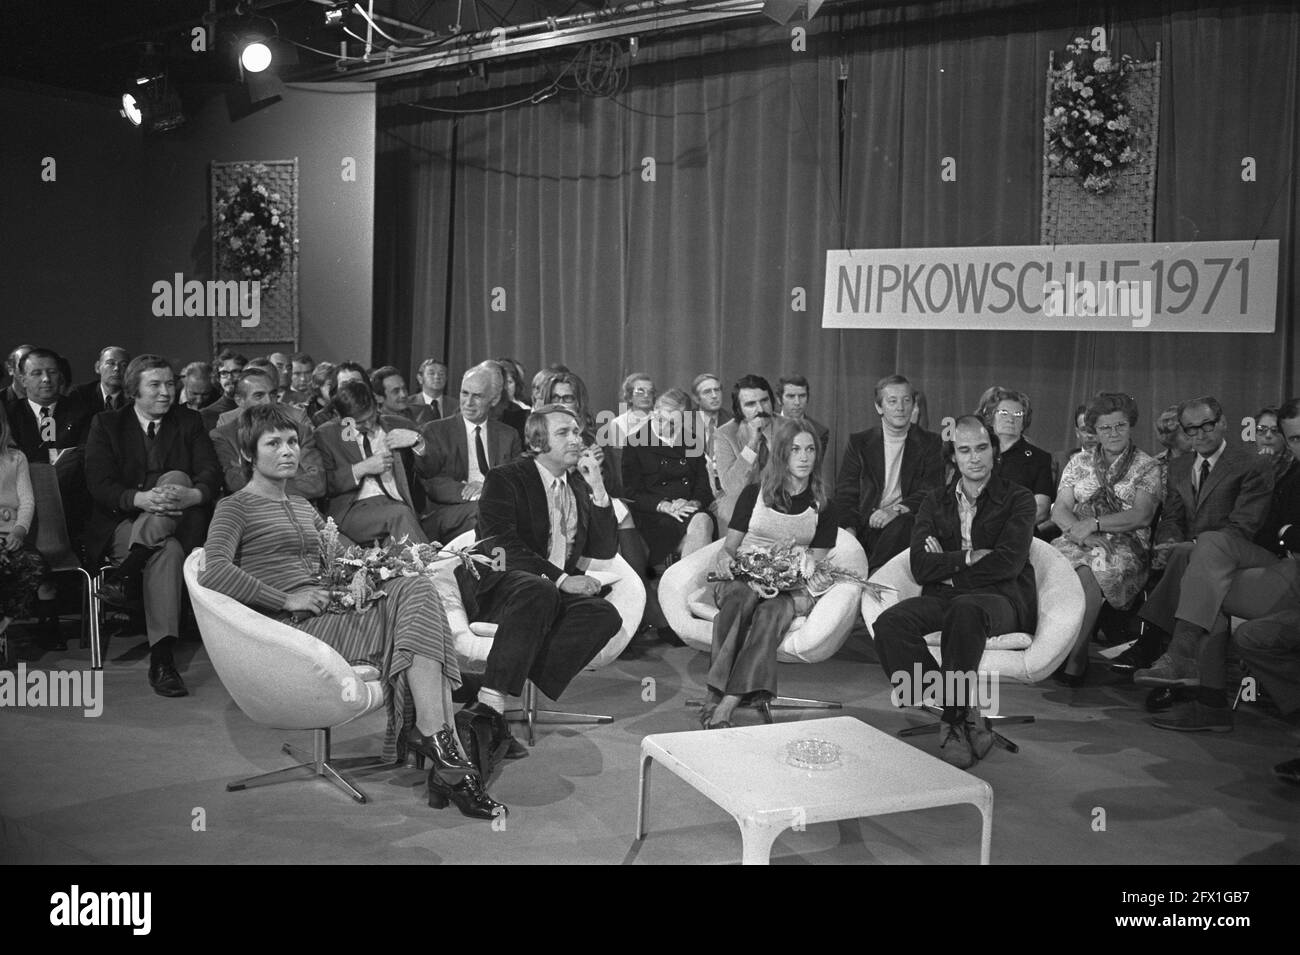 Koos Postema receives Nipkow disc for TV program A small hour U, in RAI Amsterdam. Second from left Koos Postema, far right Hans Hulscher, September 15, 1971, TV programs, awards, The Netherlands, 20th century press agency photo, news to remember, documentary, historic photography 1945-1990, visual stories, human history of the Twentieth Century, capturing moments in time Stock Photo